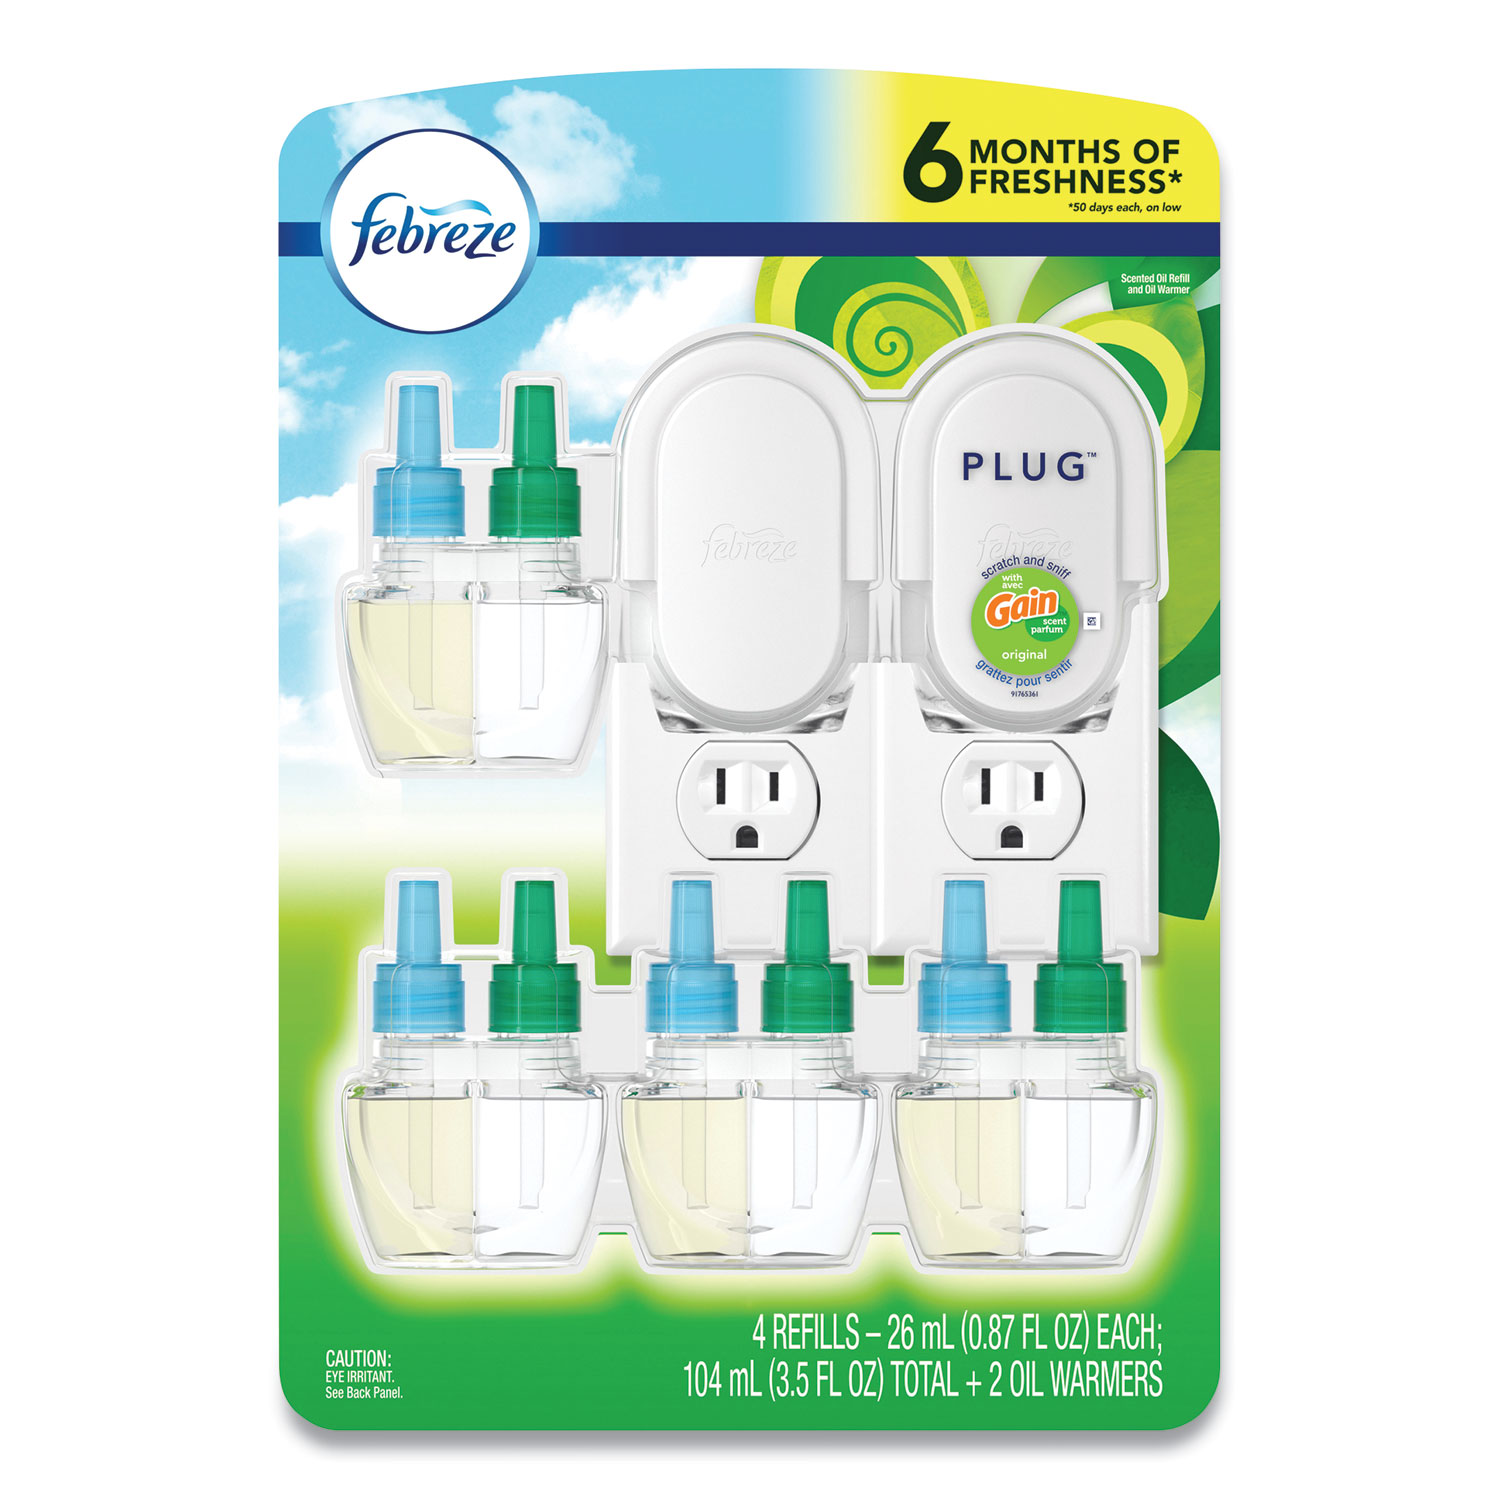  Febreze 89730 PLUG Air Freshener w/ 2 Oil Warmers and 4 Scented Oil Refills, Gain Original, 0.87 oz, Free Delivery in 1-4 Business Days (GRR22001101) 